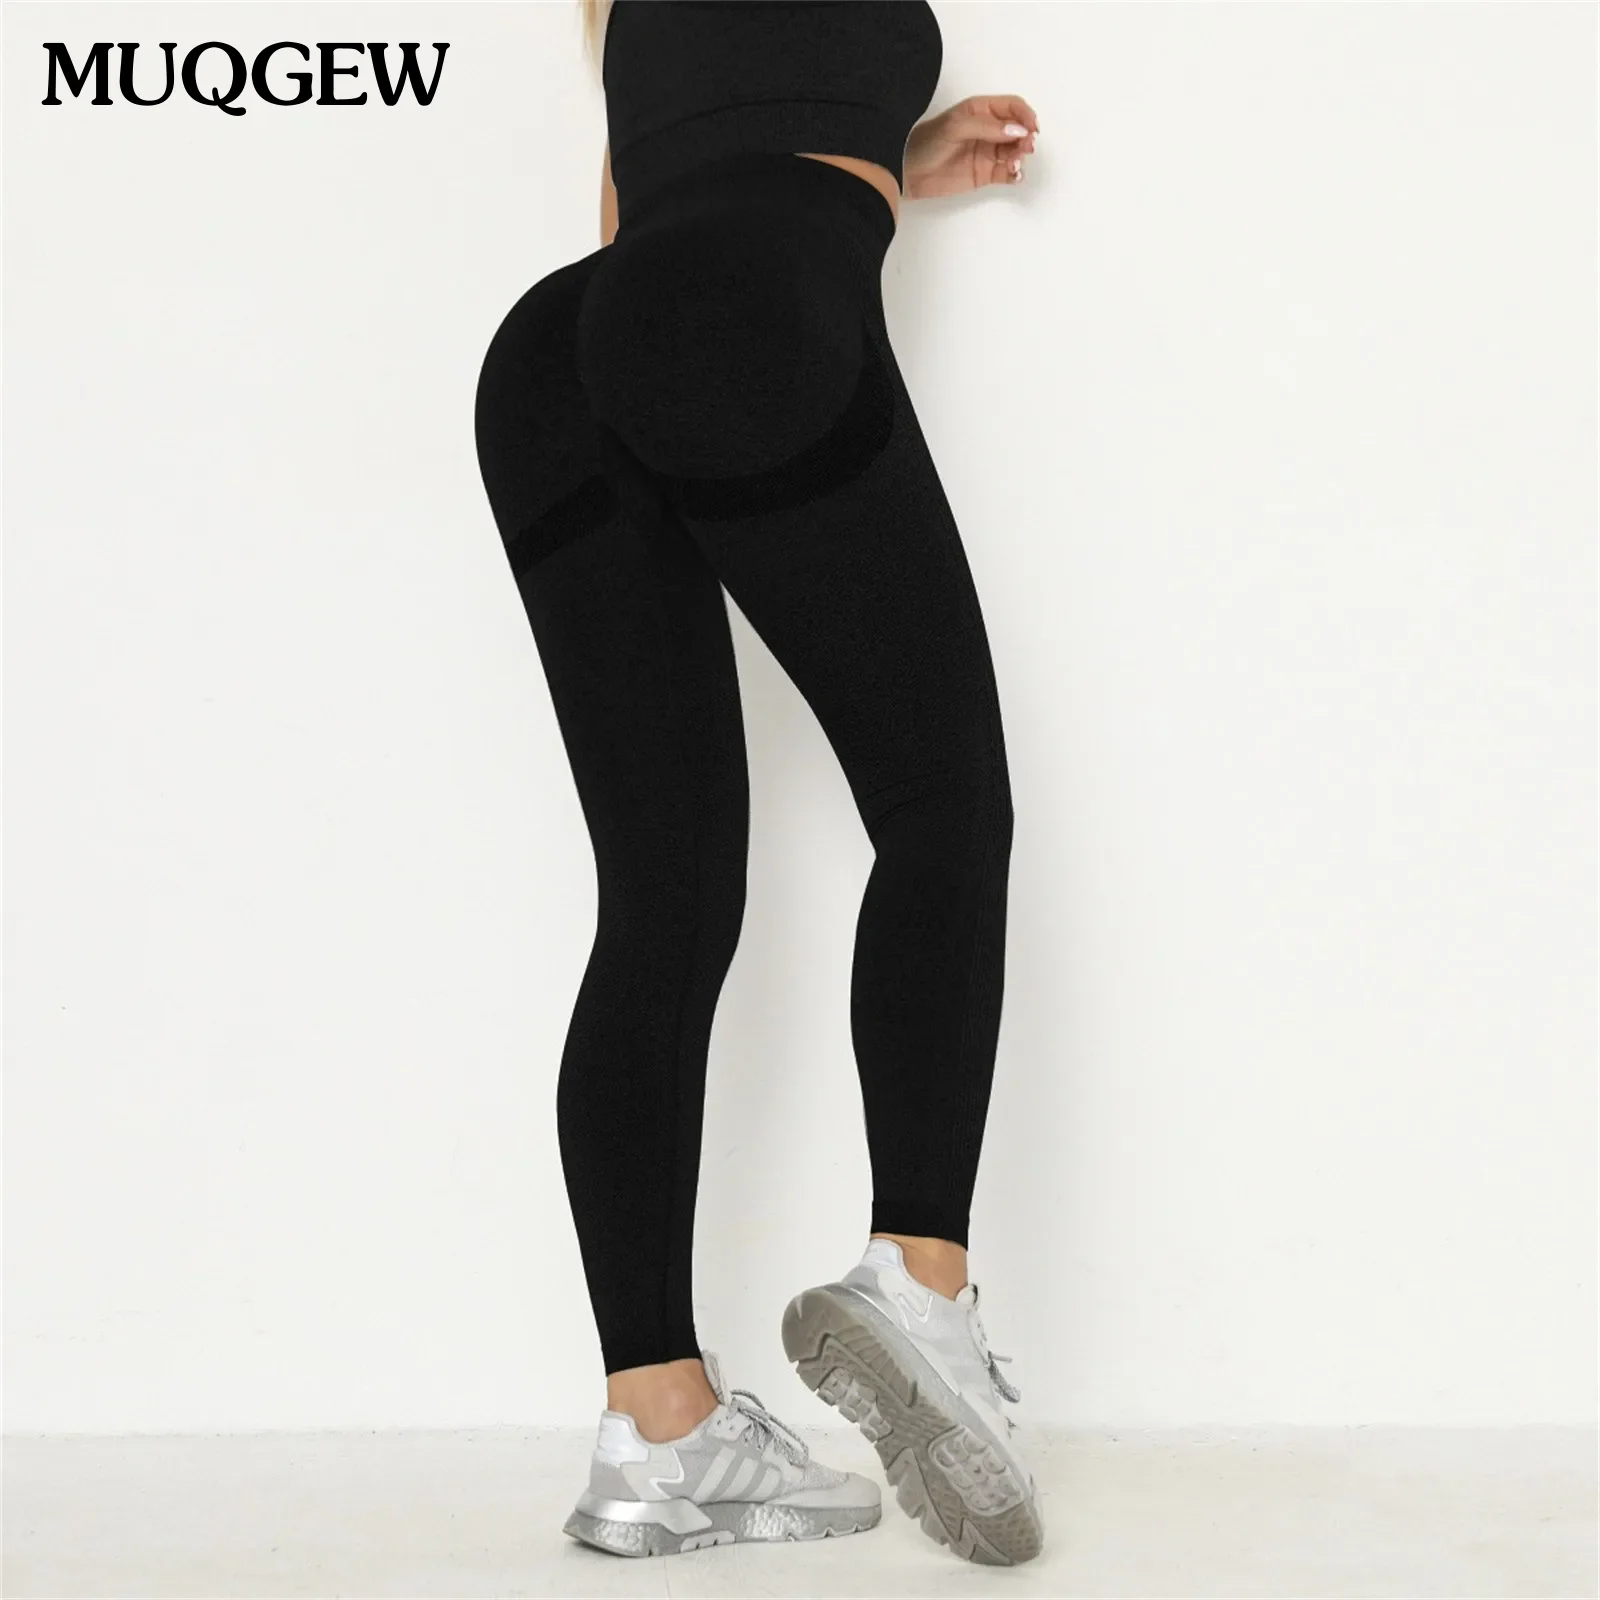 

Seamless Leggings Womens Butt' Lift Curves Workout Tights Yoga Pants Gym Outfits Fitness Clothing Sports Pants Solid Color